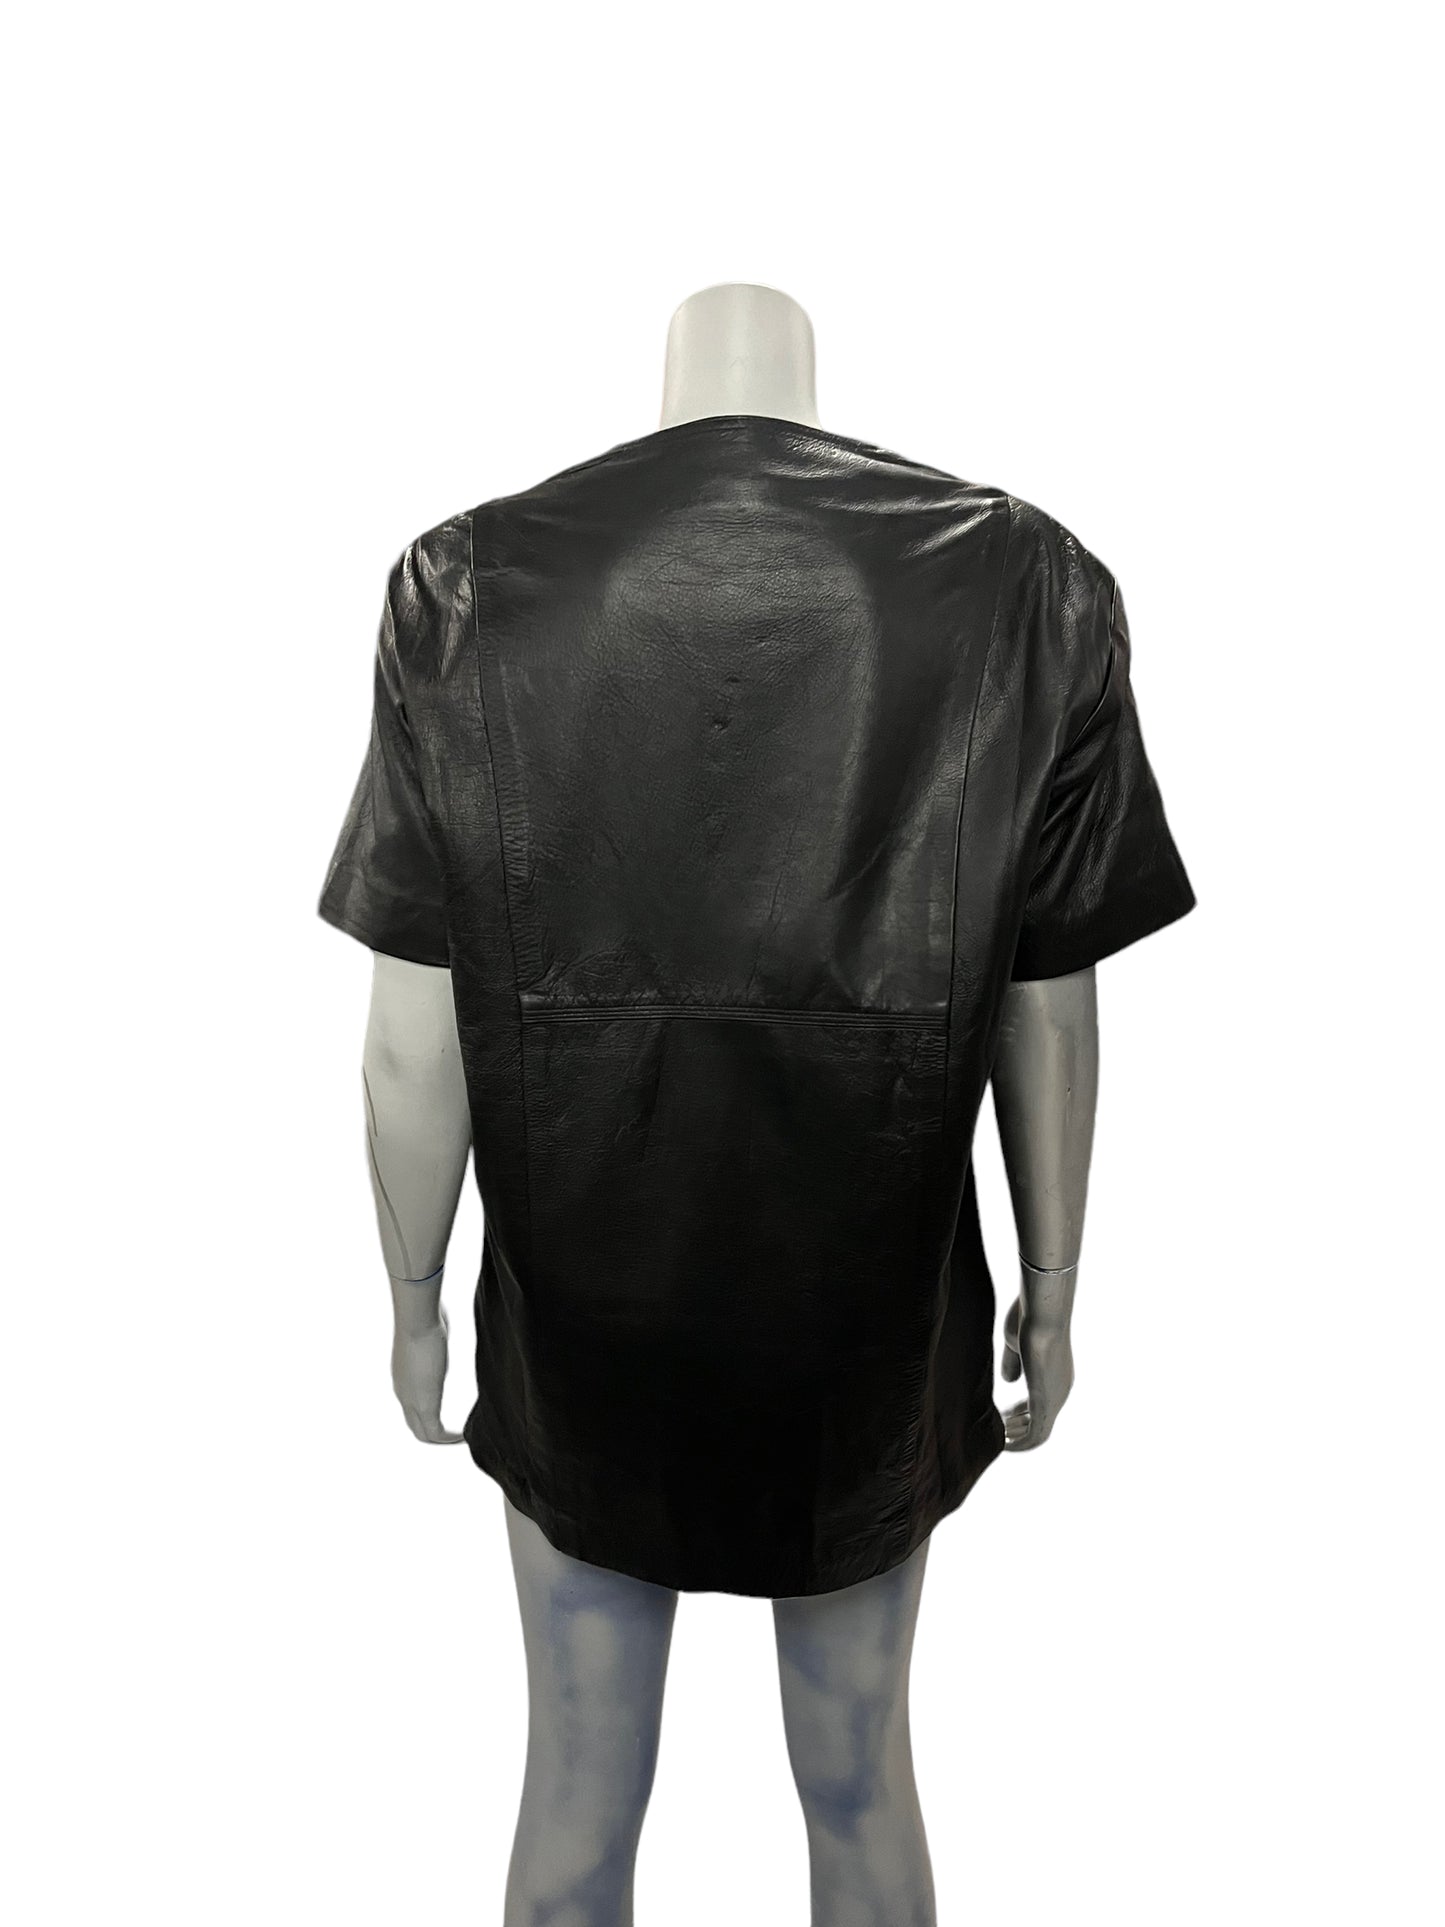 Fashion World - LL160 - Black Leather Shirt V-neck With Strings